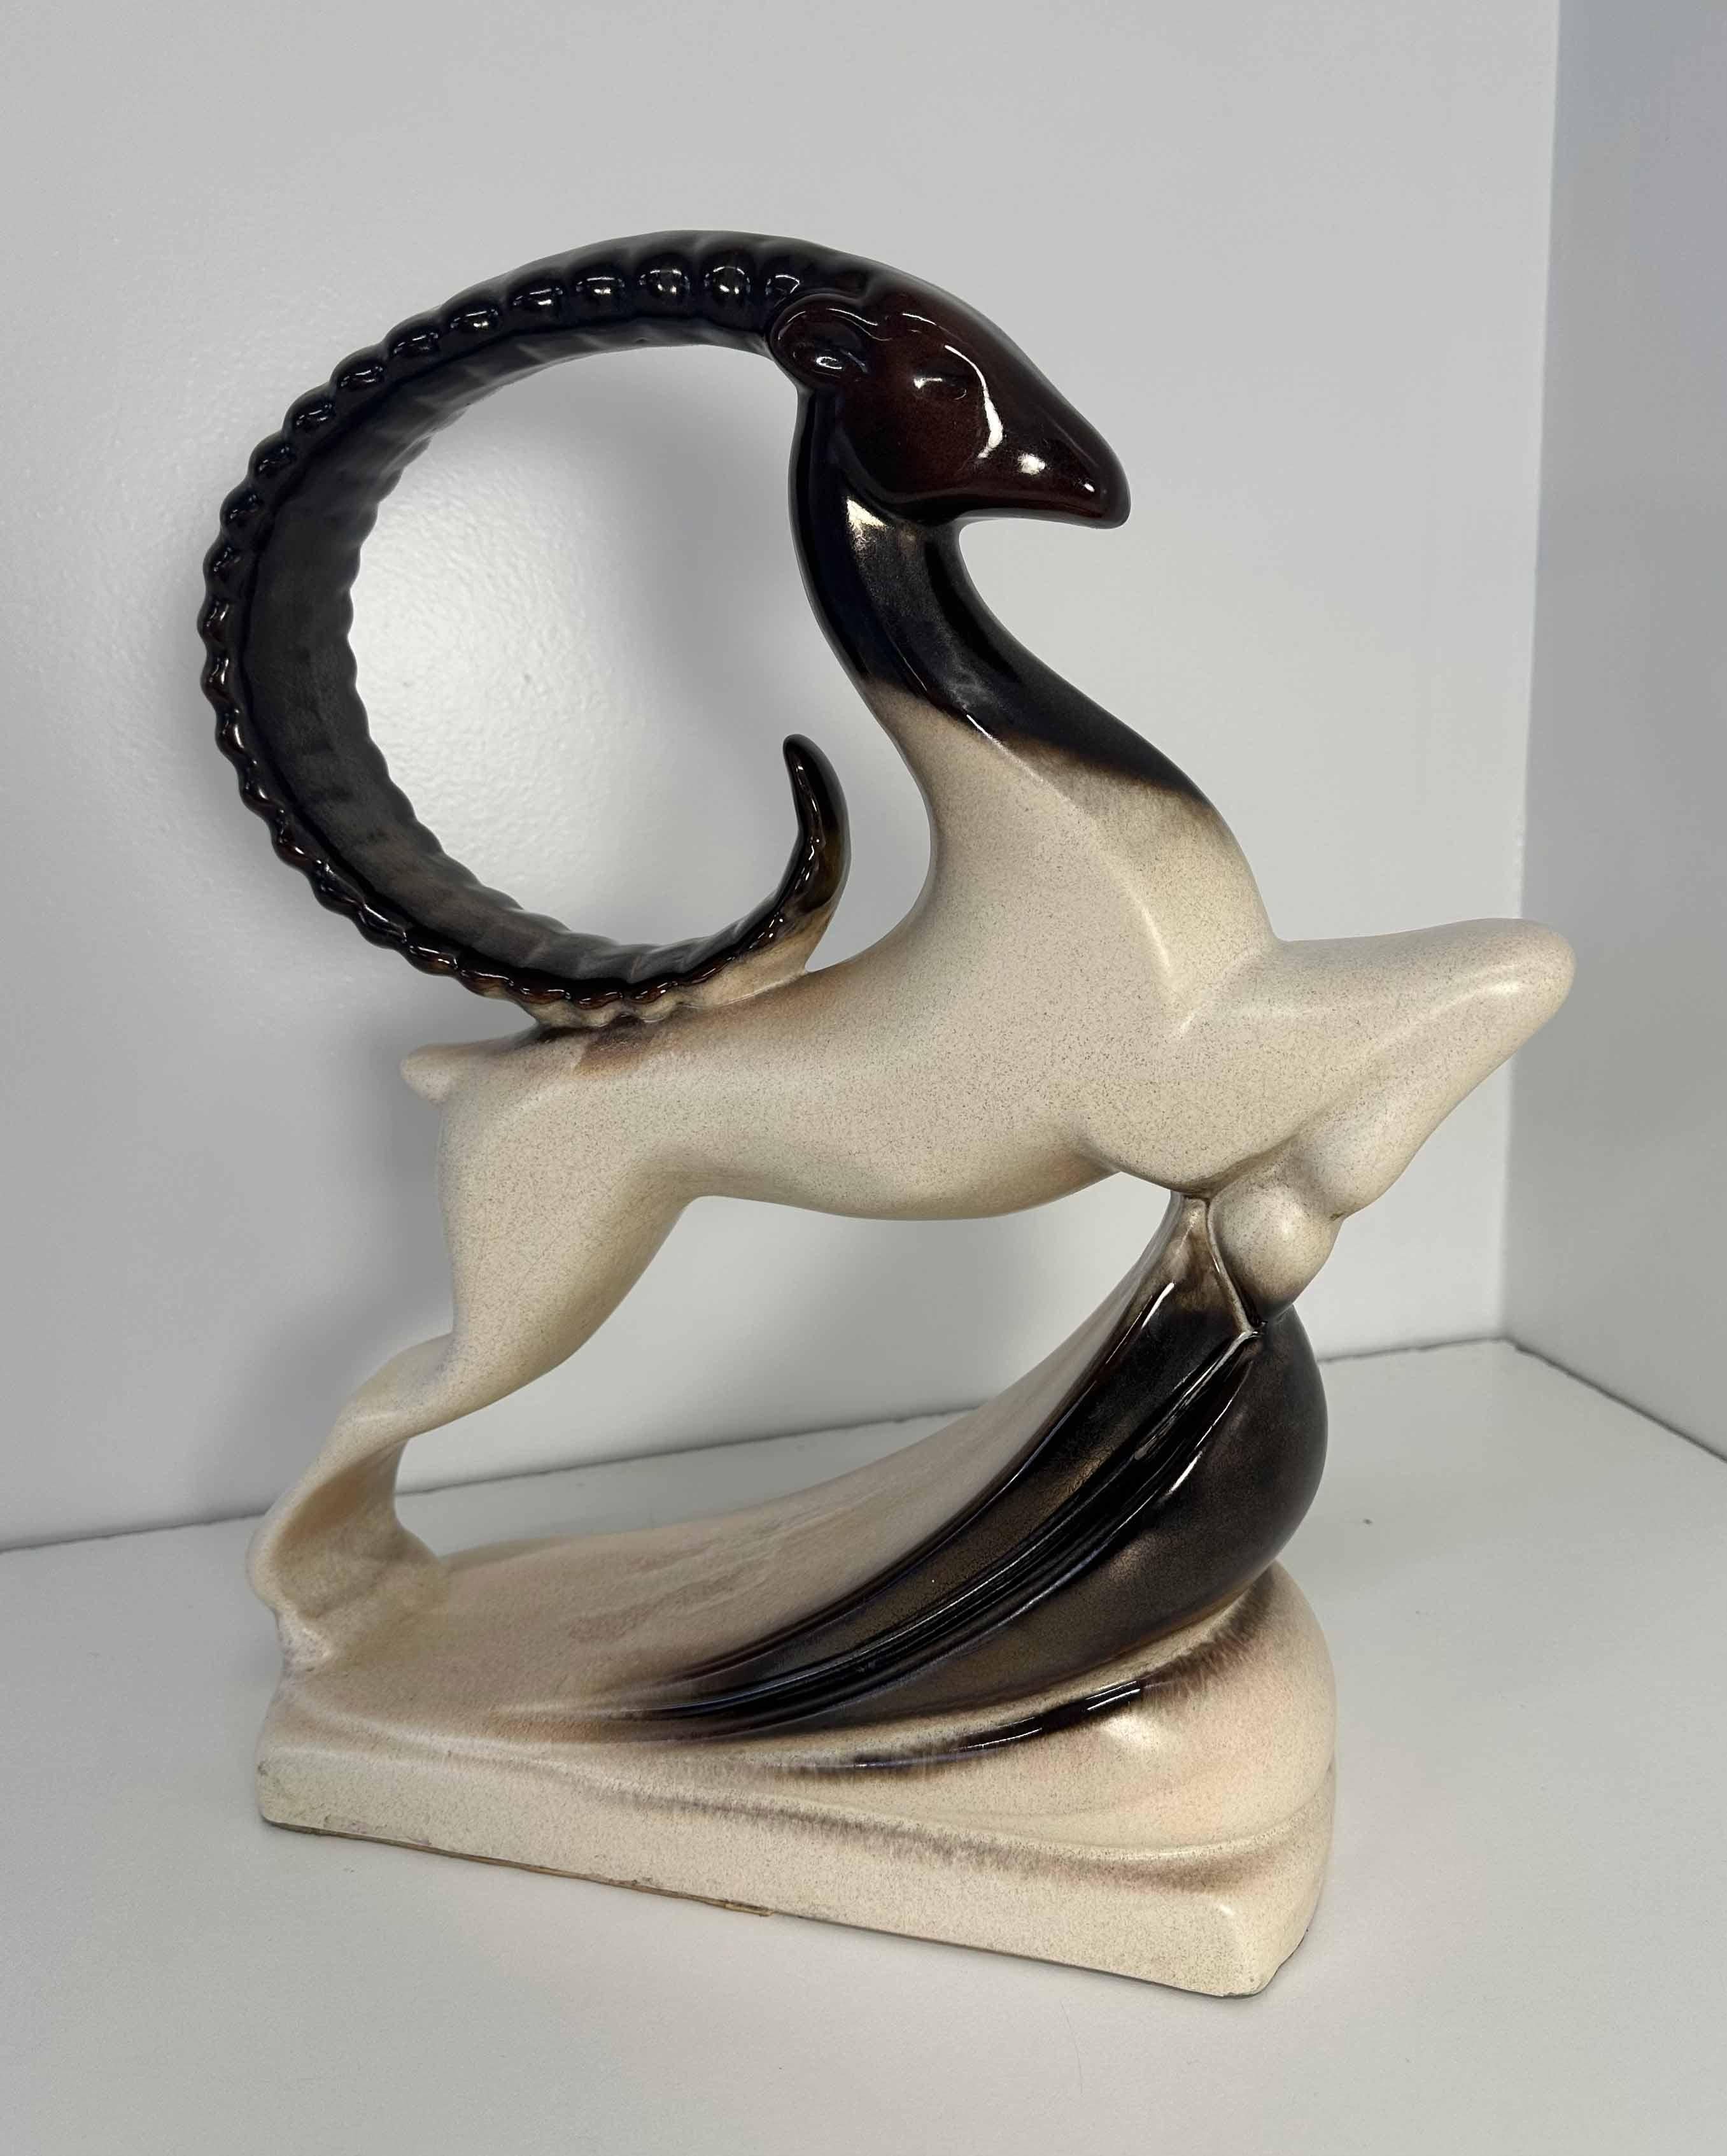 This large Art Deco style ceramic was produced in the USA in the 1960s by Royal Haeger. 
It features a bicolored, deep brown and white leaping ram with a high gloss glaze finish. 
It is in very good vintage conditions.